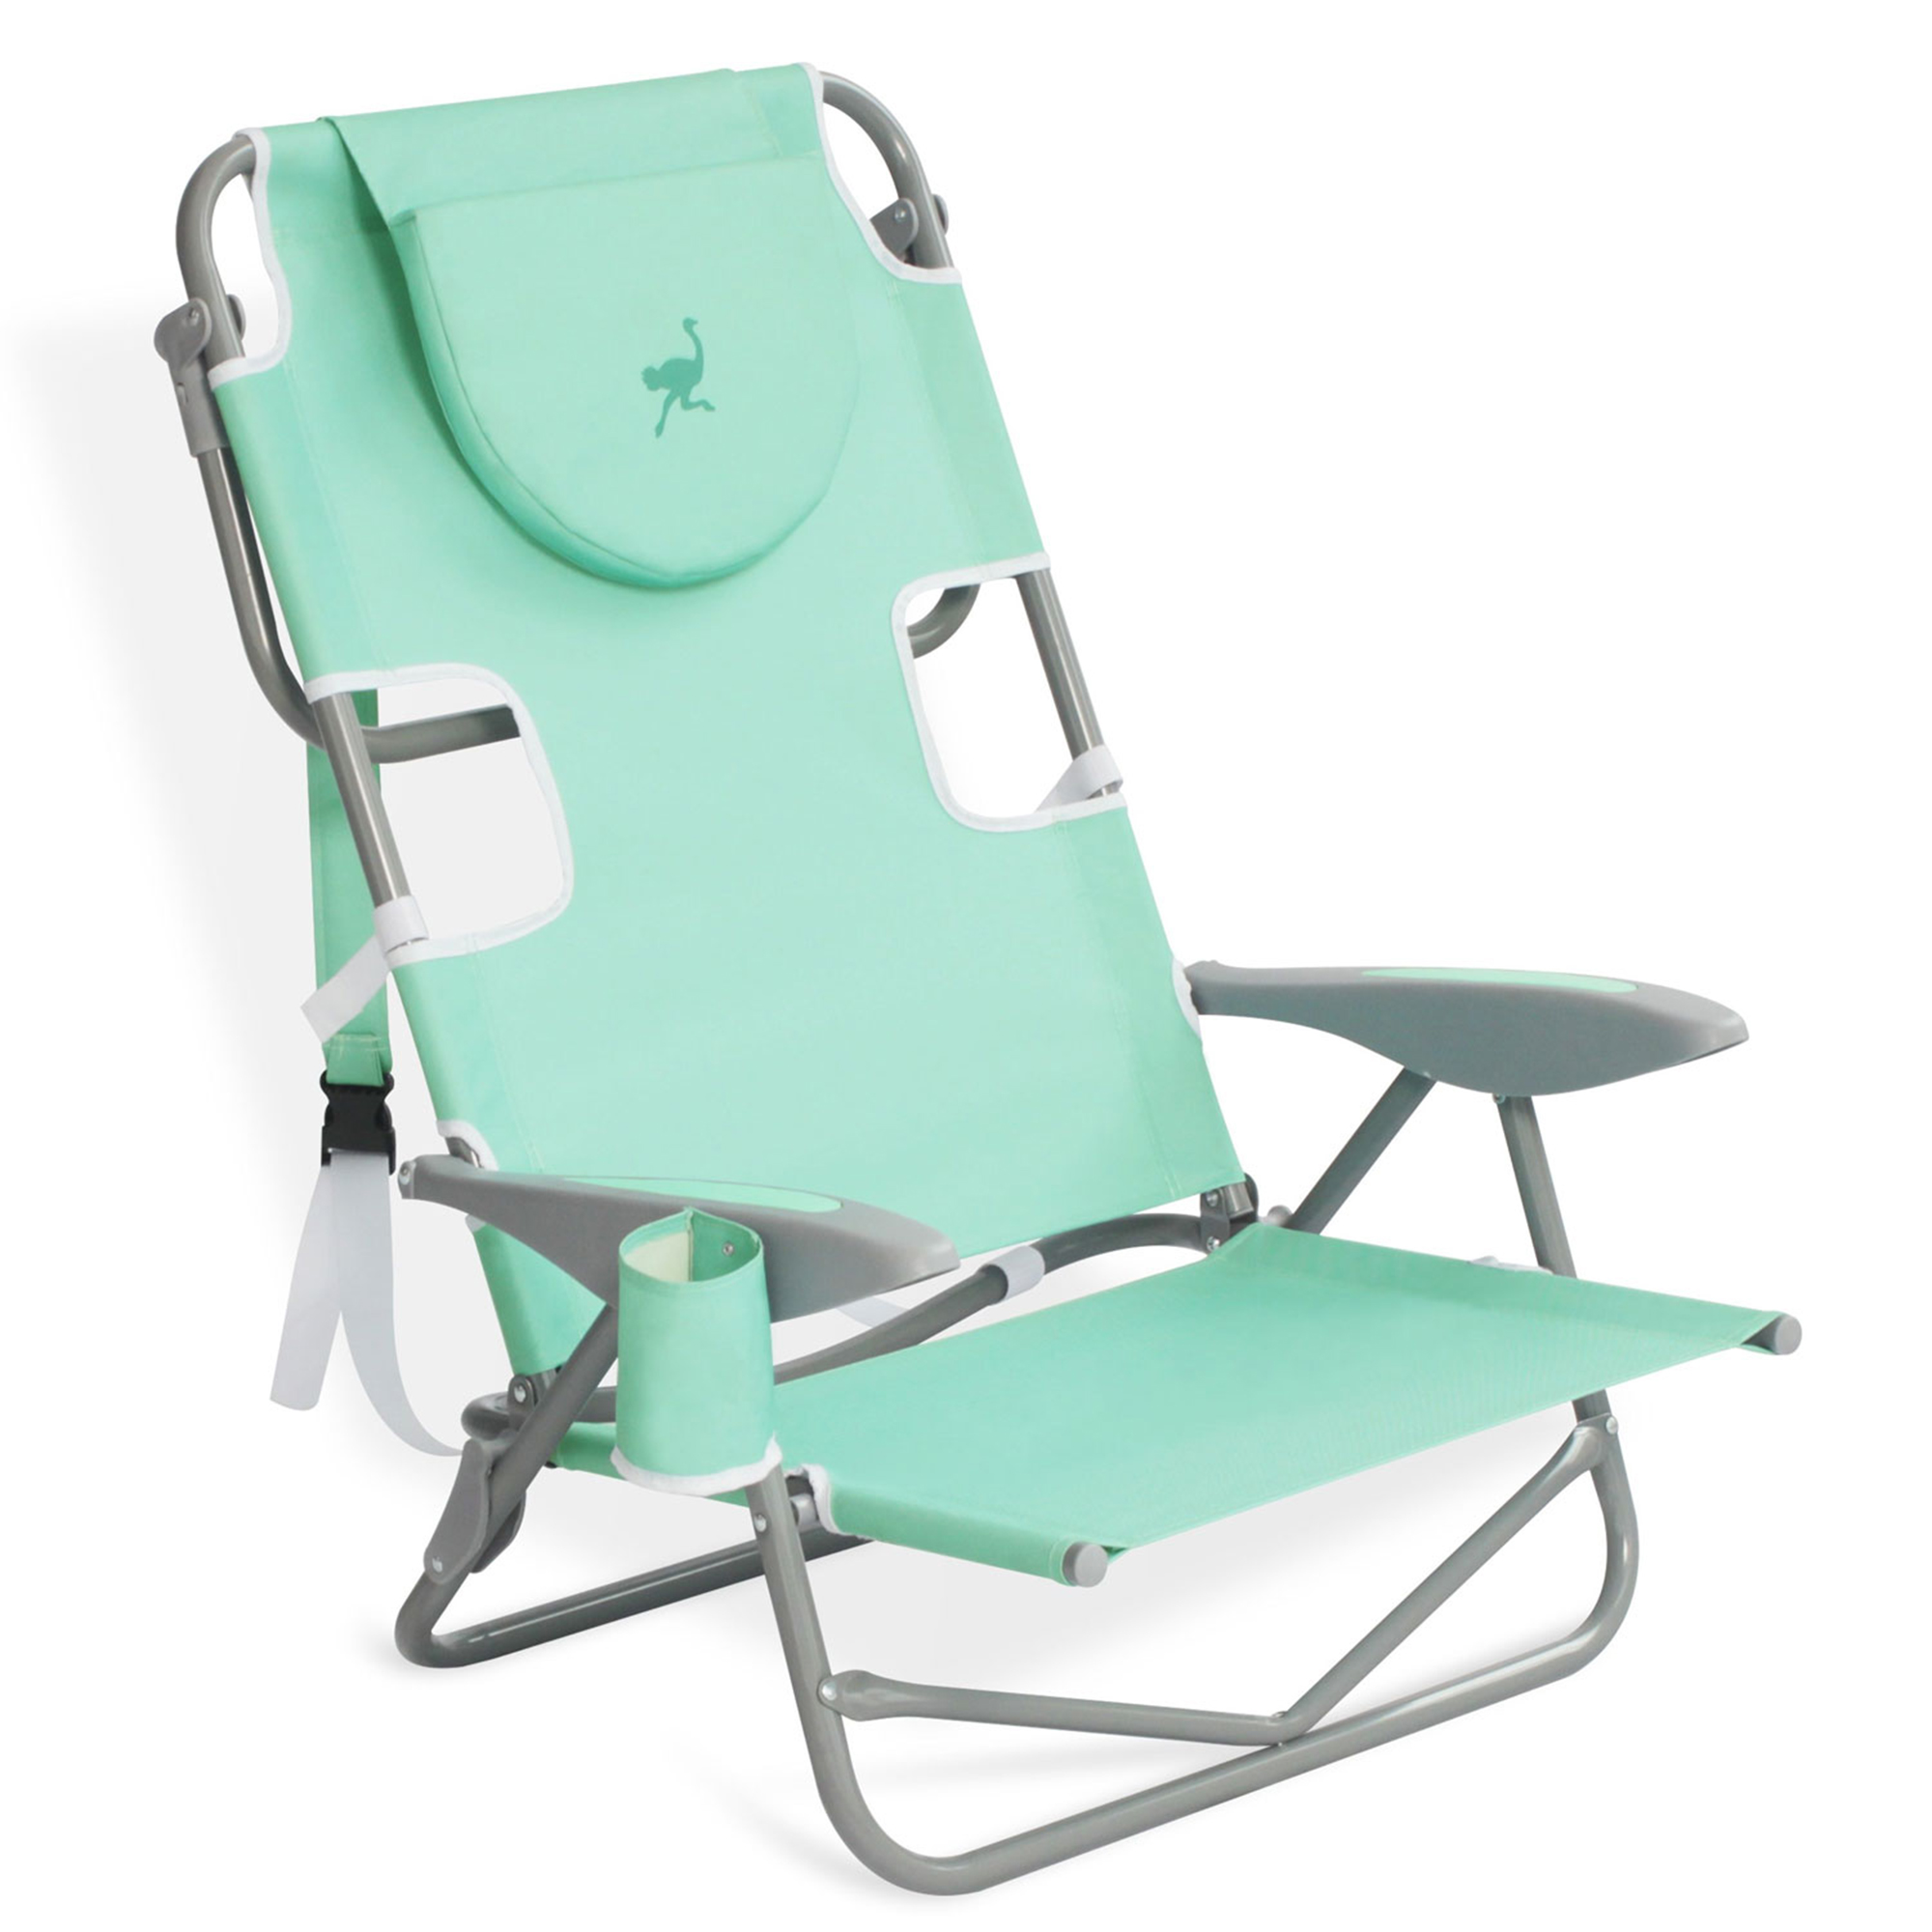 Ostrich On-Your-Back Outdoor Reclining Beach Pool Camping Chair, Teal - image 8 of 12